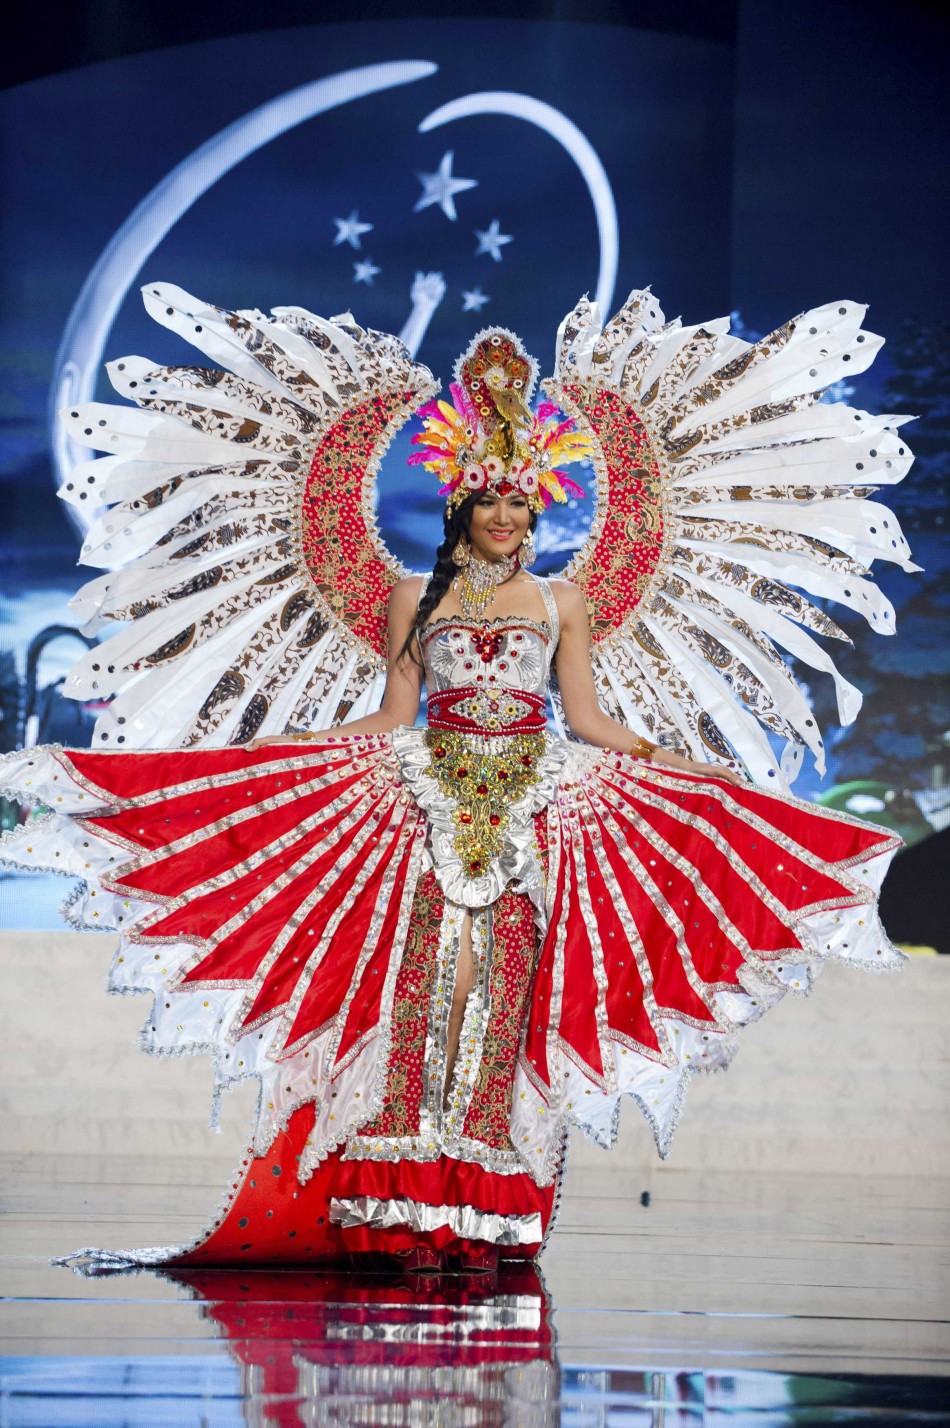 Miss Indonesia Maria Selena on stage at the 2012 Miss Universe National Costume Show at PH Live in Las Vegas